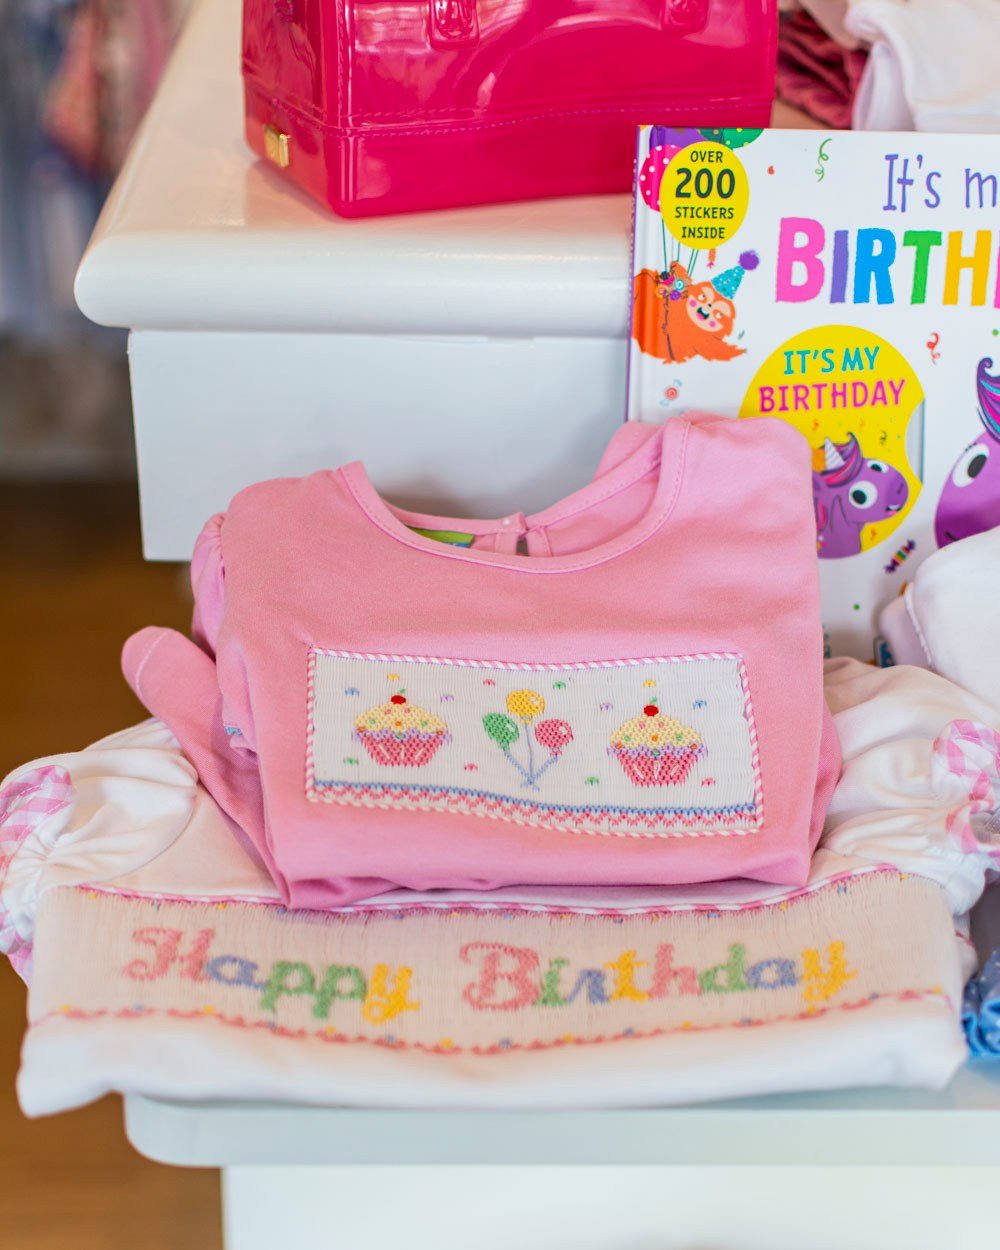 Are you celebrating a birthday in May or June? We can help make it special! 🎈 Find a festive shirt, dress or book at Fancy Pants. 🎂